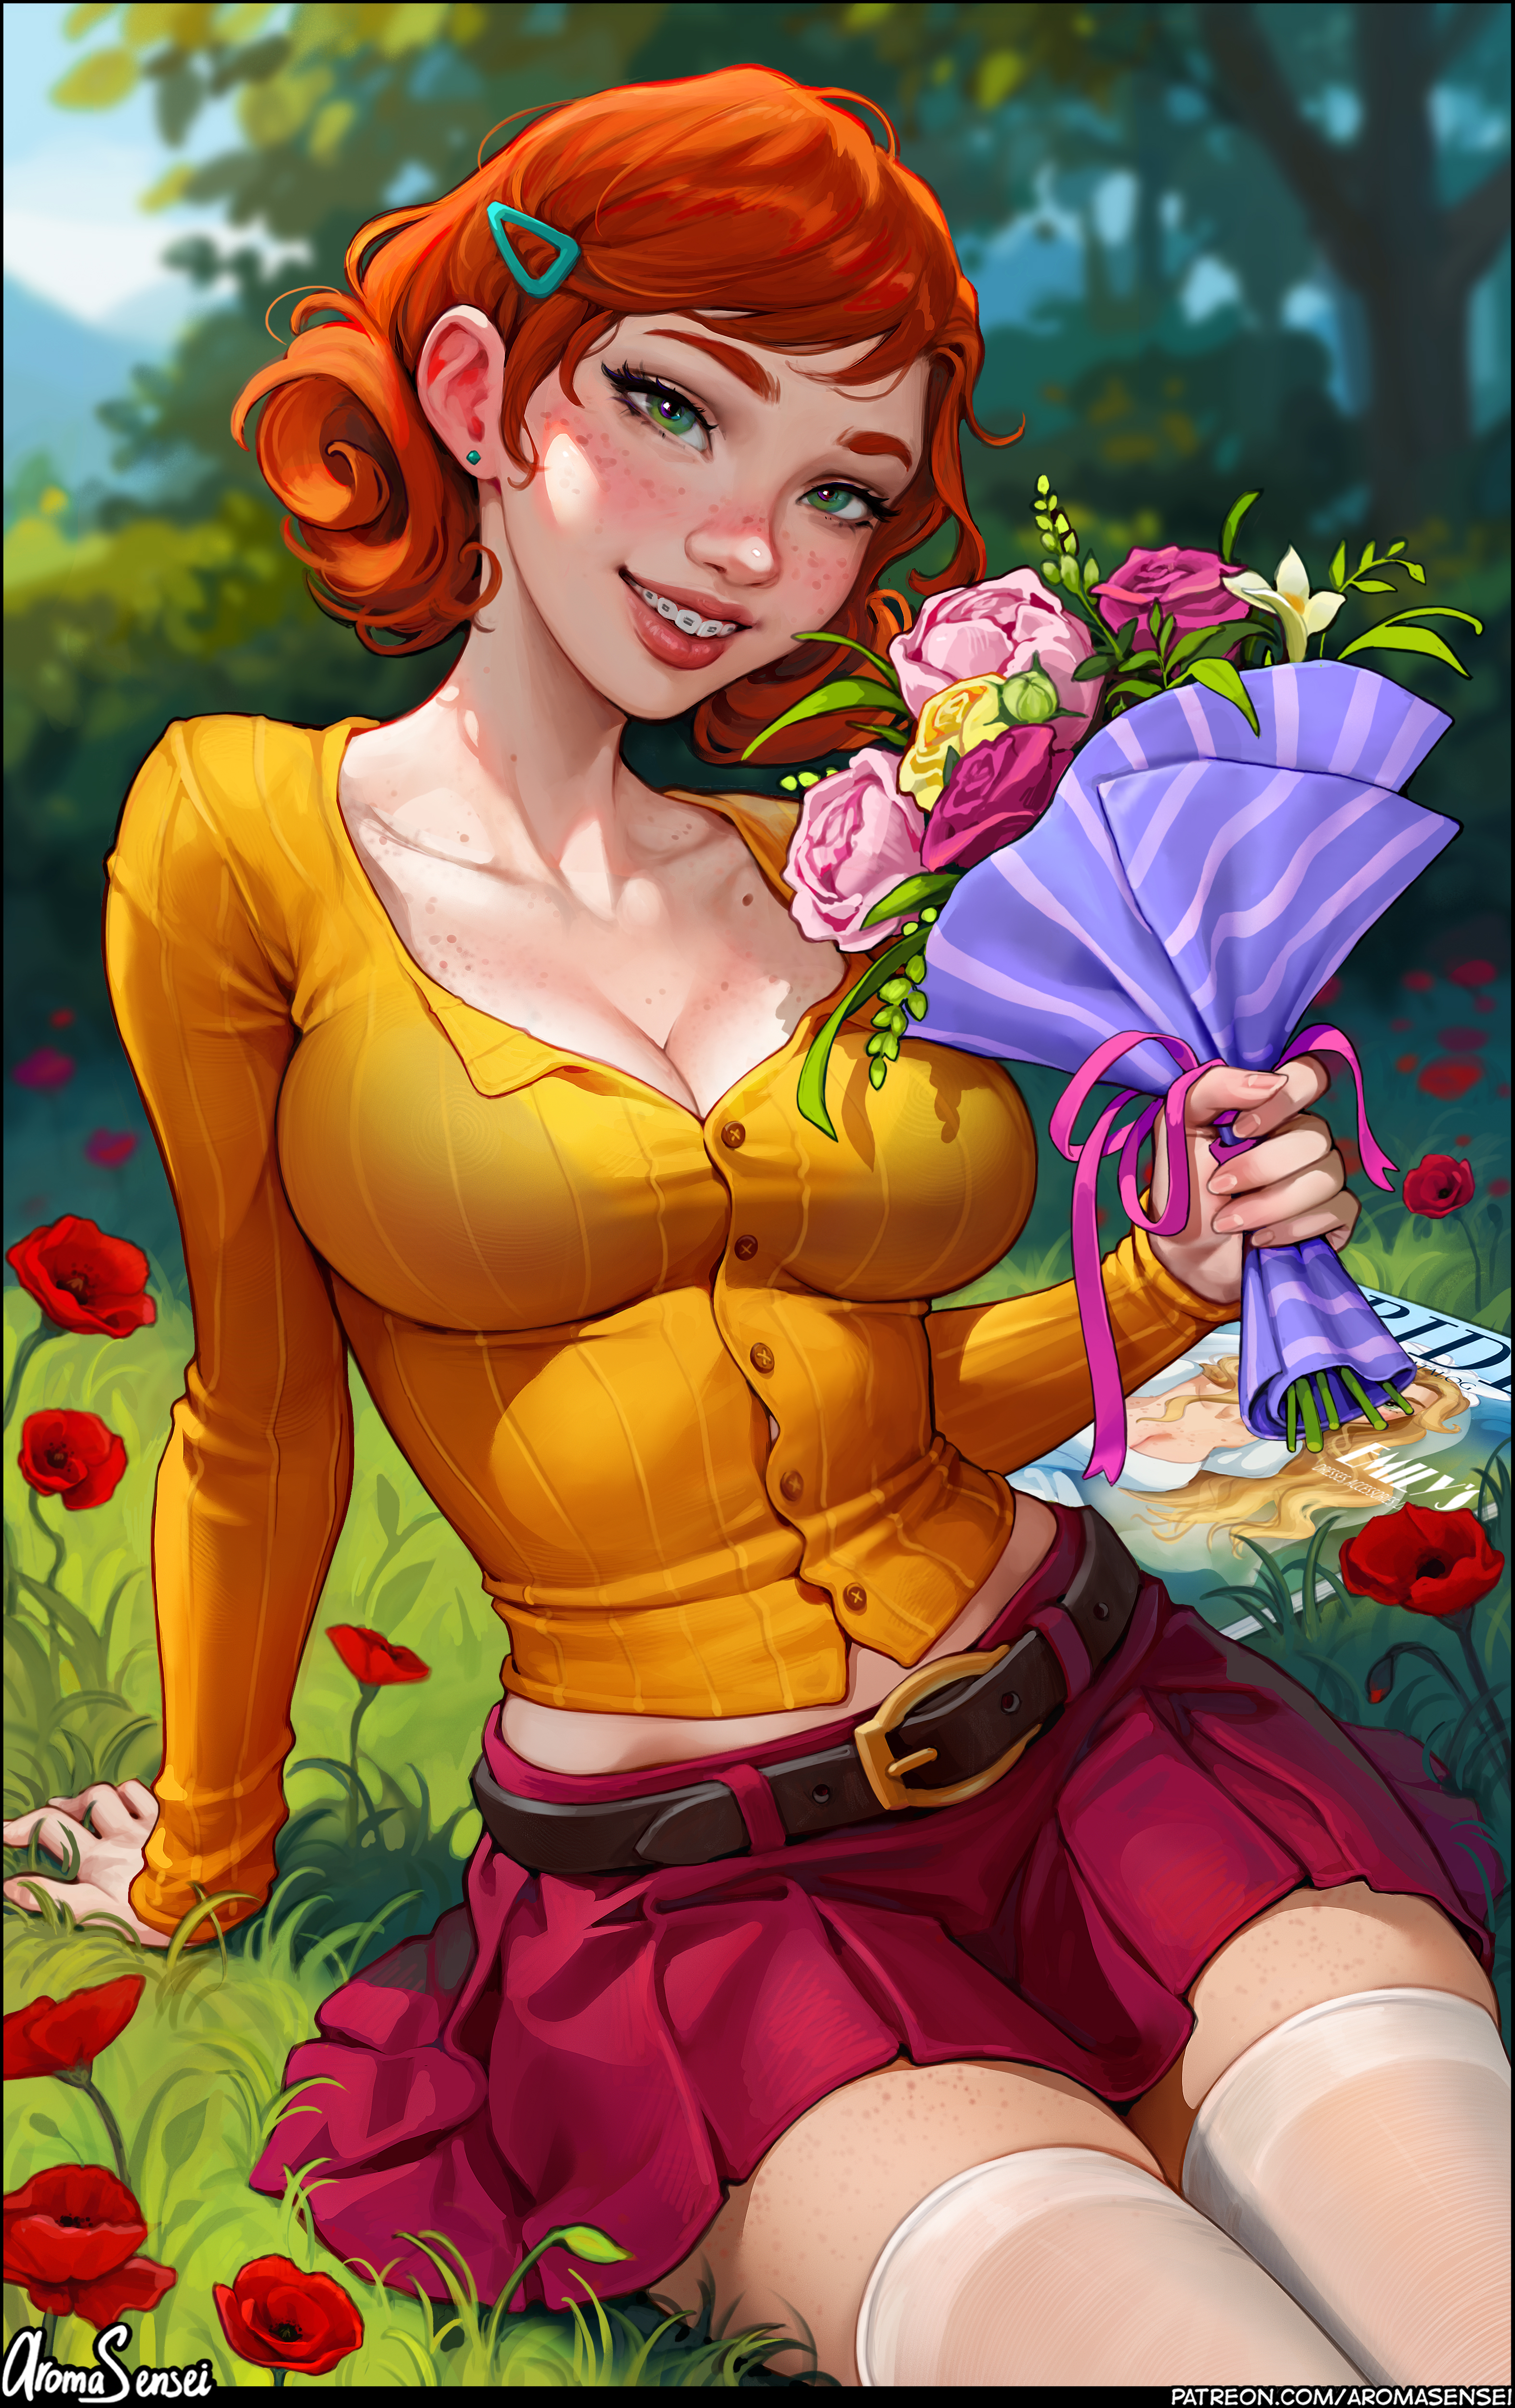 General 3145x5000 Penny (Stardew Valley) Stardew Valley video games video game girls cleavage miniskirt flowers smiling braces 2D artwork drawing fan art Aroma Sensei